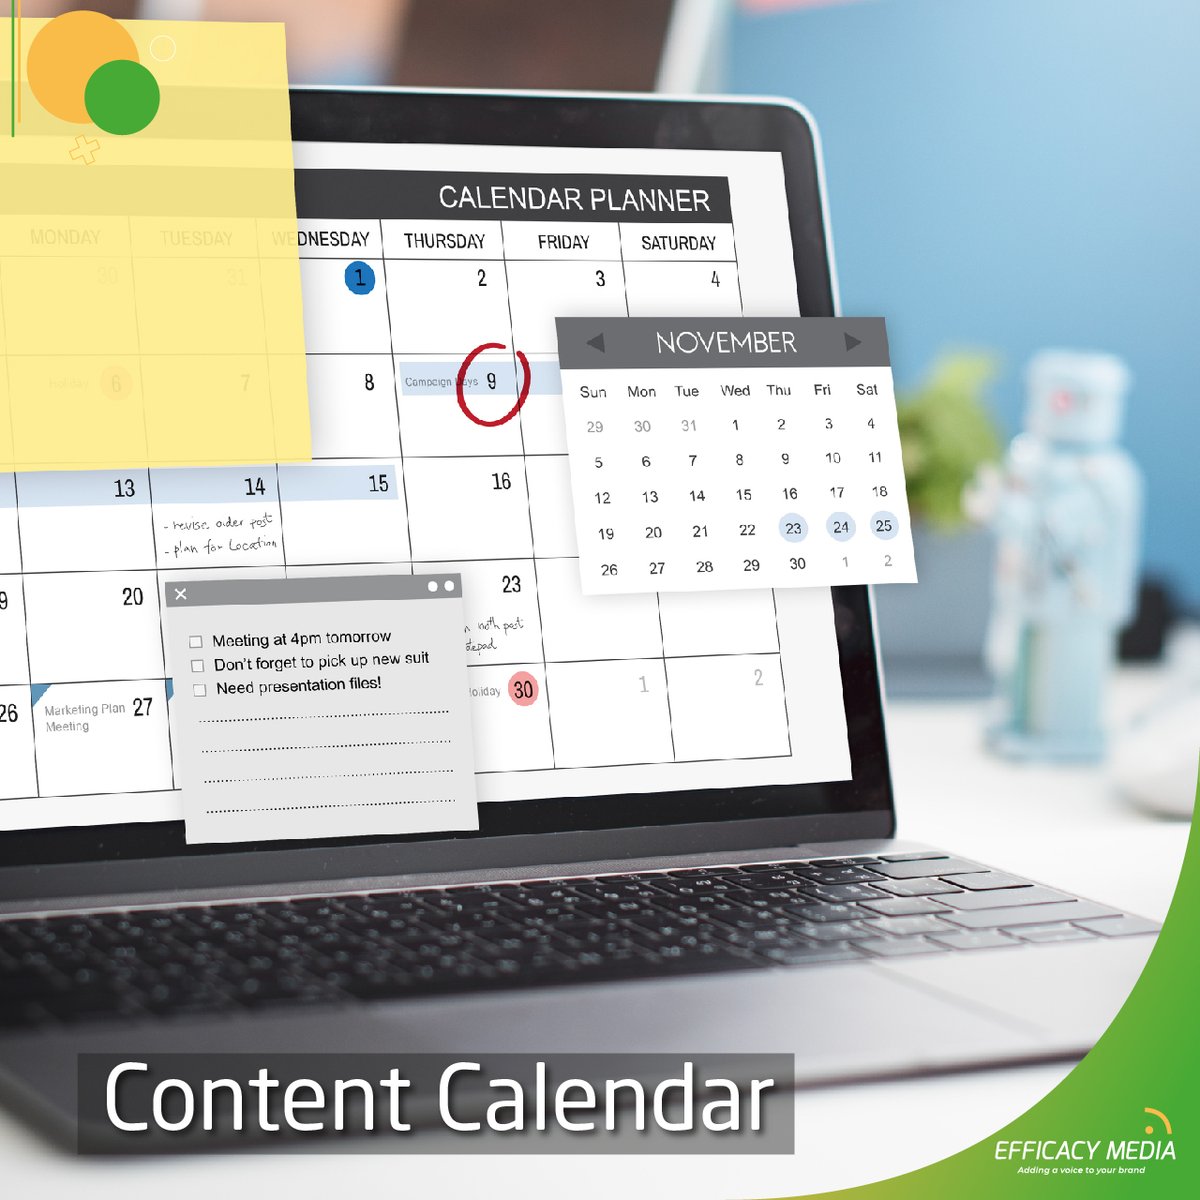 A content calendar ensures consistency, aligns with business goals, and boosts efficiency. At Efficacy Media, we use it to plan client content strategically. Email us at hello@efficacymedia.co. for impactful PR and marketing narratives.   📅💼🚀  #EfficacyMedia #ContentStrategy